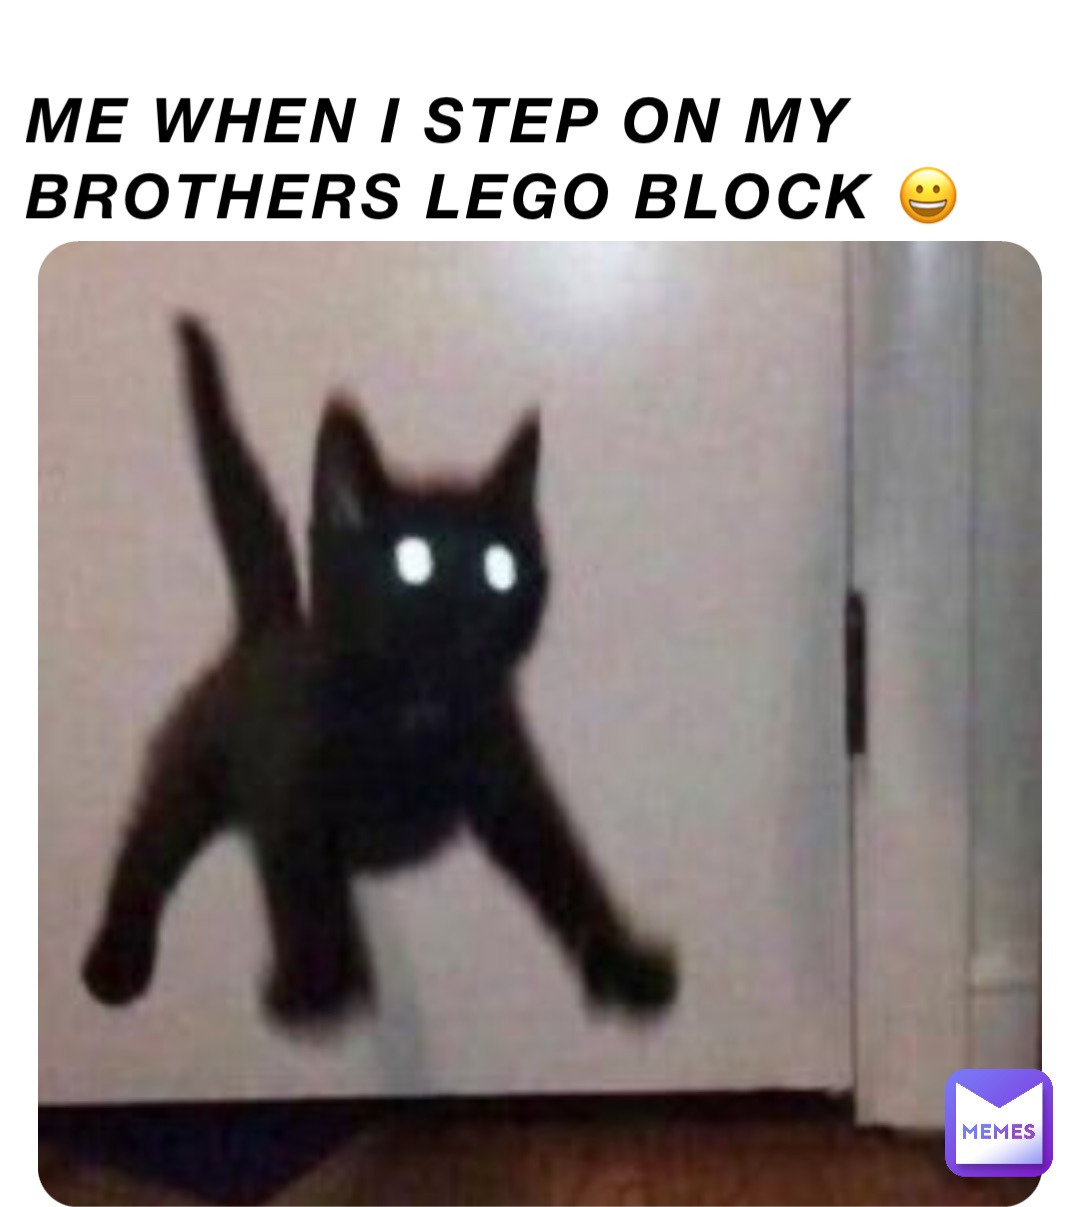 Me when I step on my brothers Lego block 😀